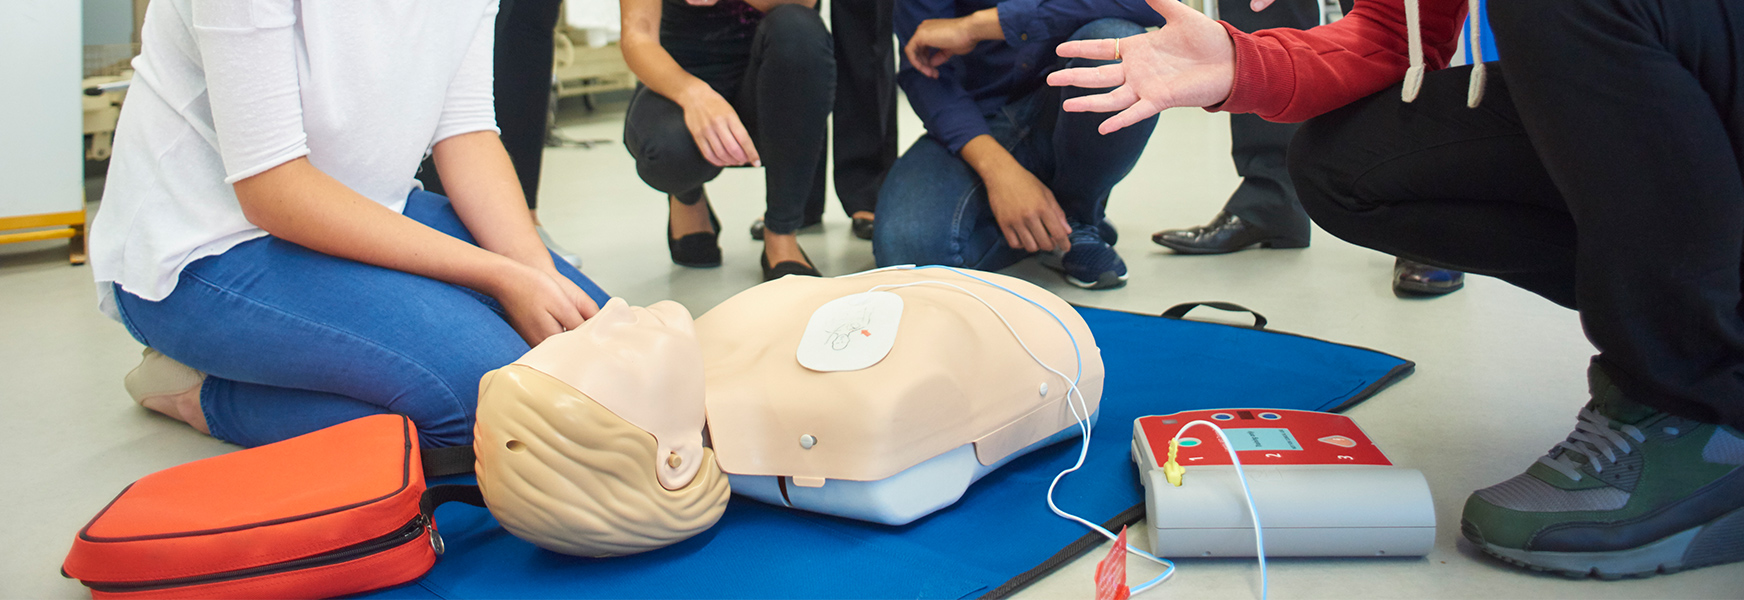 AED Safety Training